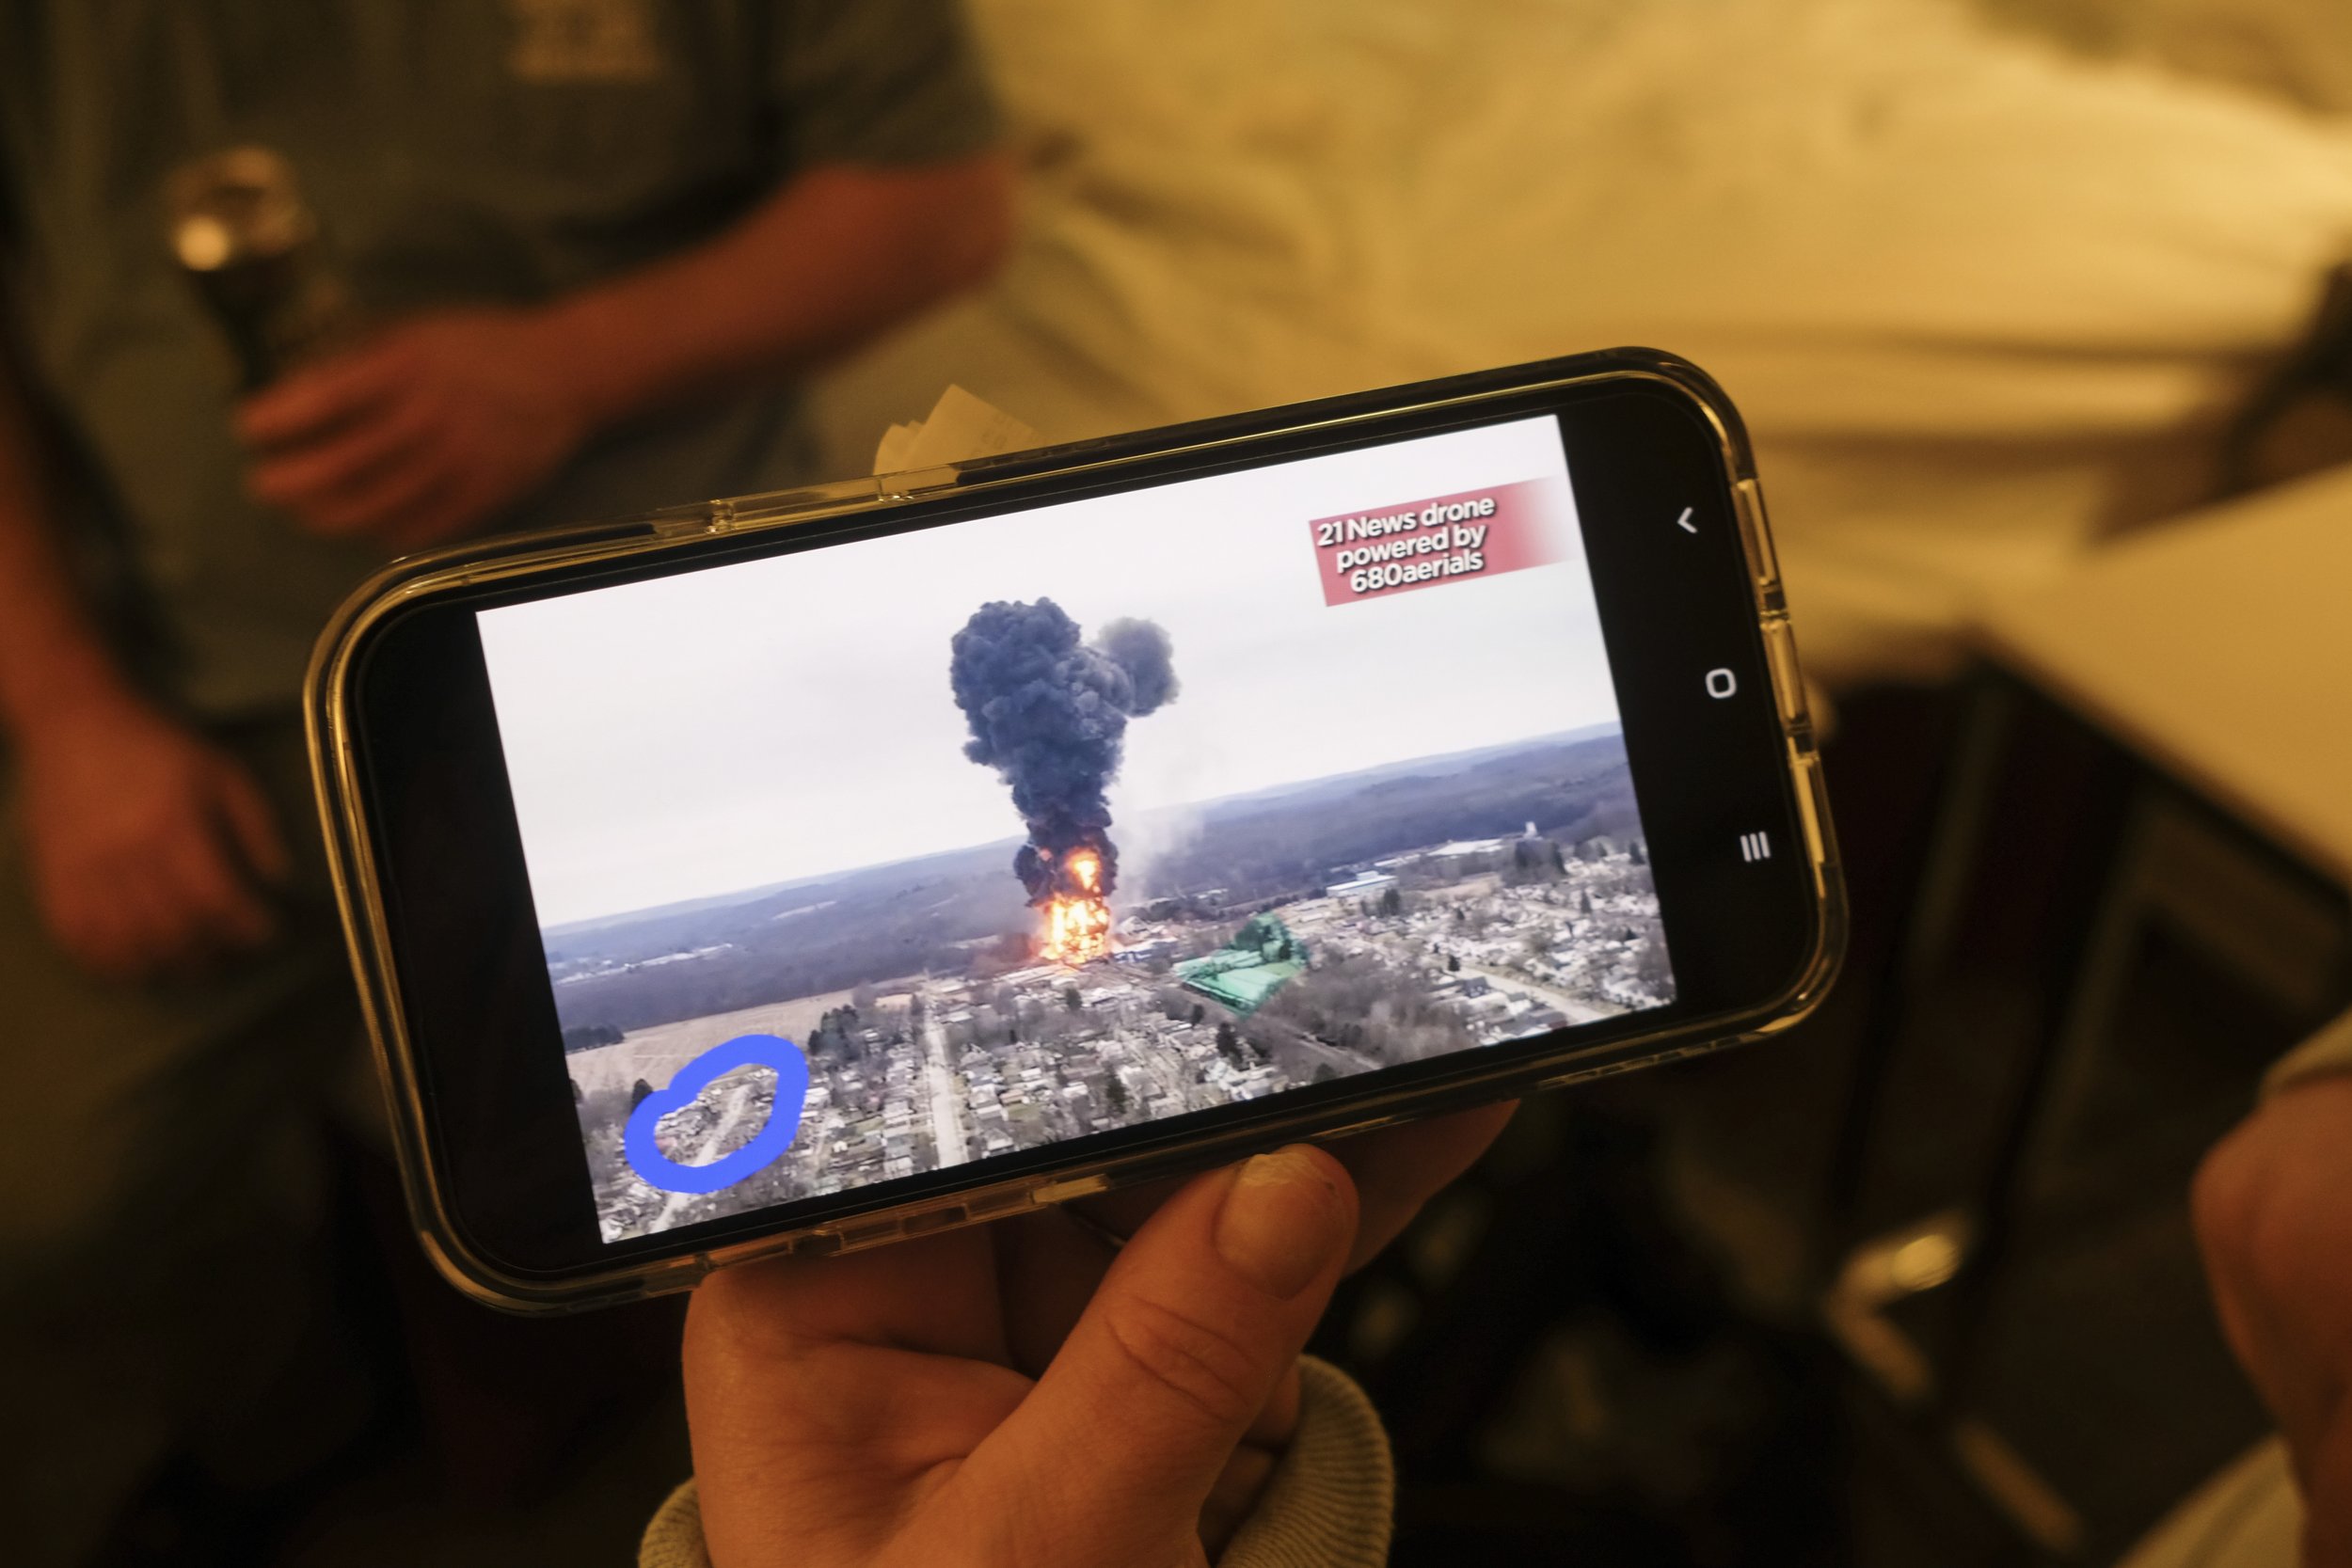  Nicole Bentel shows a screen grab of the smoke plume that resulted from the controlled burn of toxic chemicals such as Vinyl Chloride after the derailment of a Norfolk Southern train on the outskirts of East Palestine, Ohio while they stay at their 